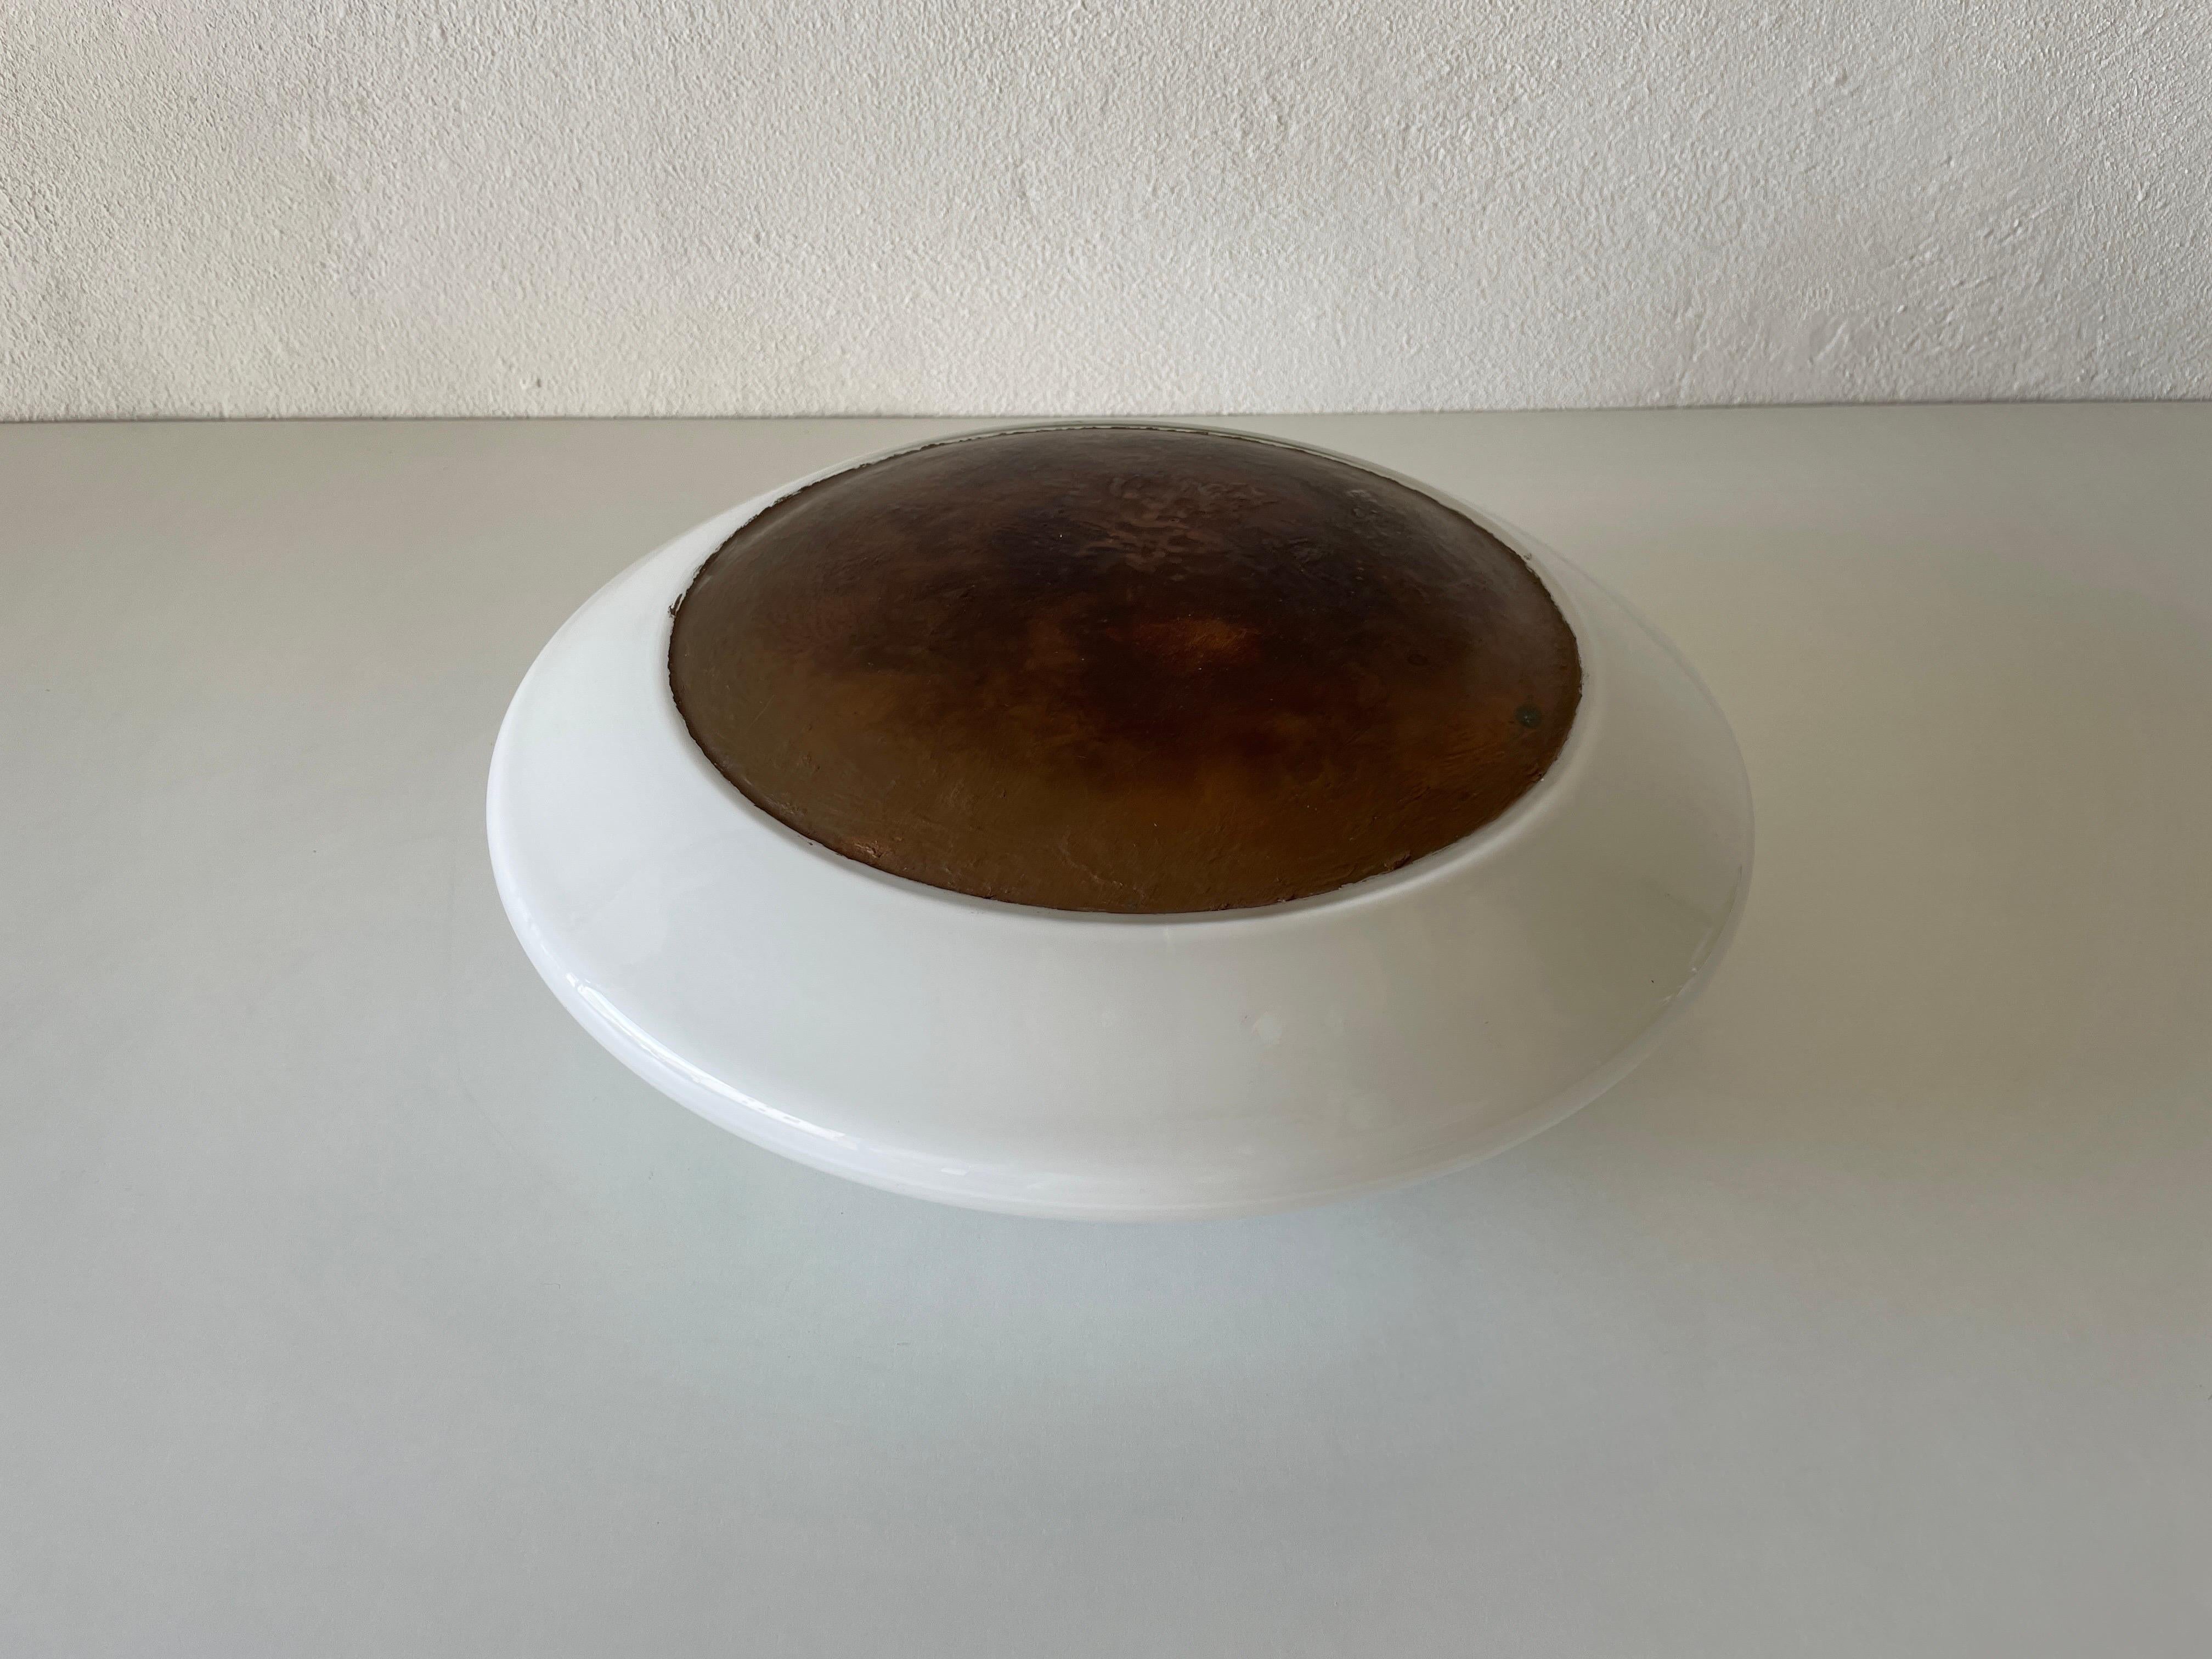 Mushroom White Glass Flush Mount Ceiling or Wall Lamp with Copper paint detail by Peill Putzler, 1960s, Germany

Sculptural very elegant rare design flush mount. 

It is very ideal and suitable for all living areas.

Lamp is in good condition. No